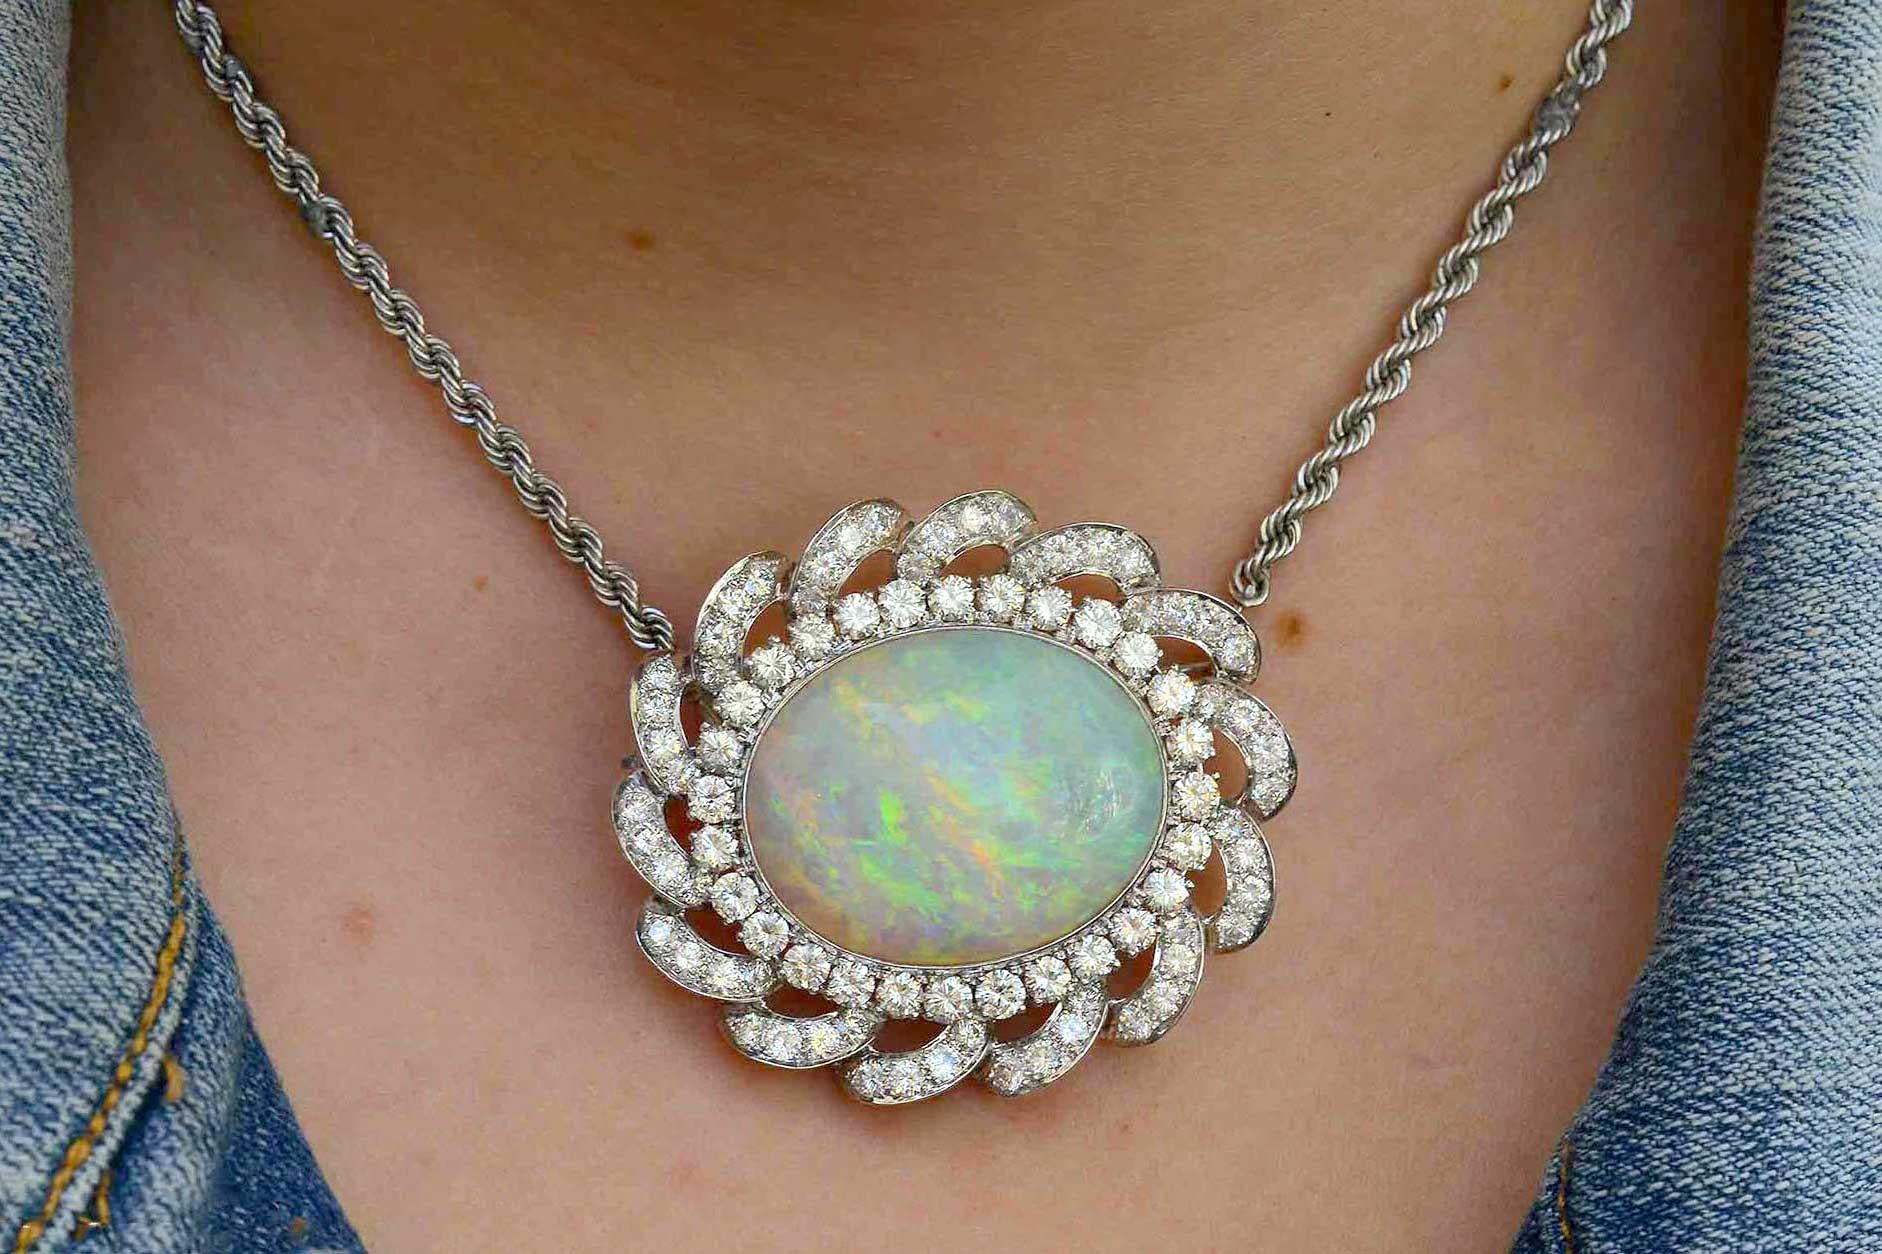 An incredible 33 carat Australian Opal necklace adorned with over 8 carats of near-flawless diamonds orbit around a celestial galaxy of an amazing, large and fiery specimen gemstone imbued with a kaleidoscopic array of colors. This Space